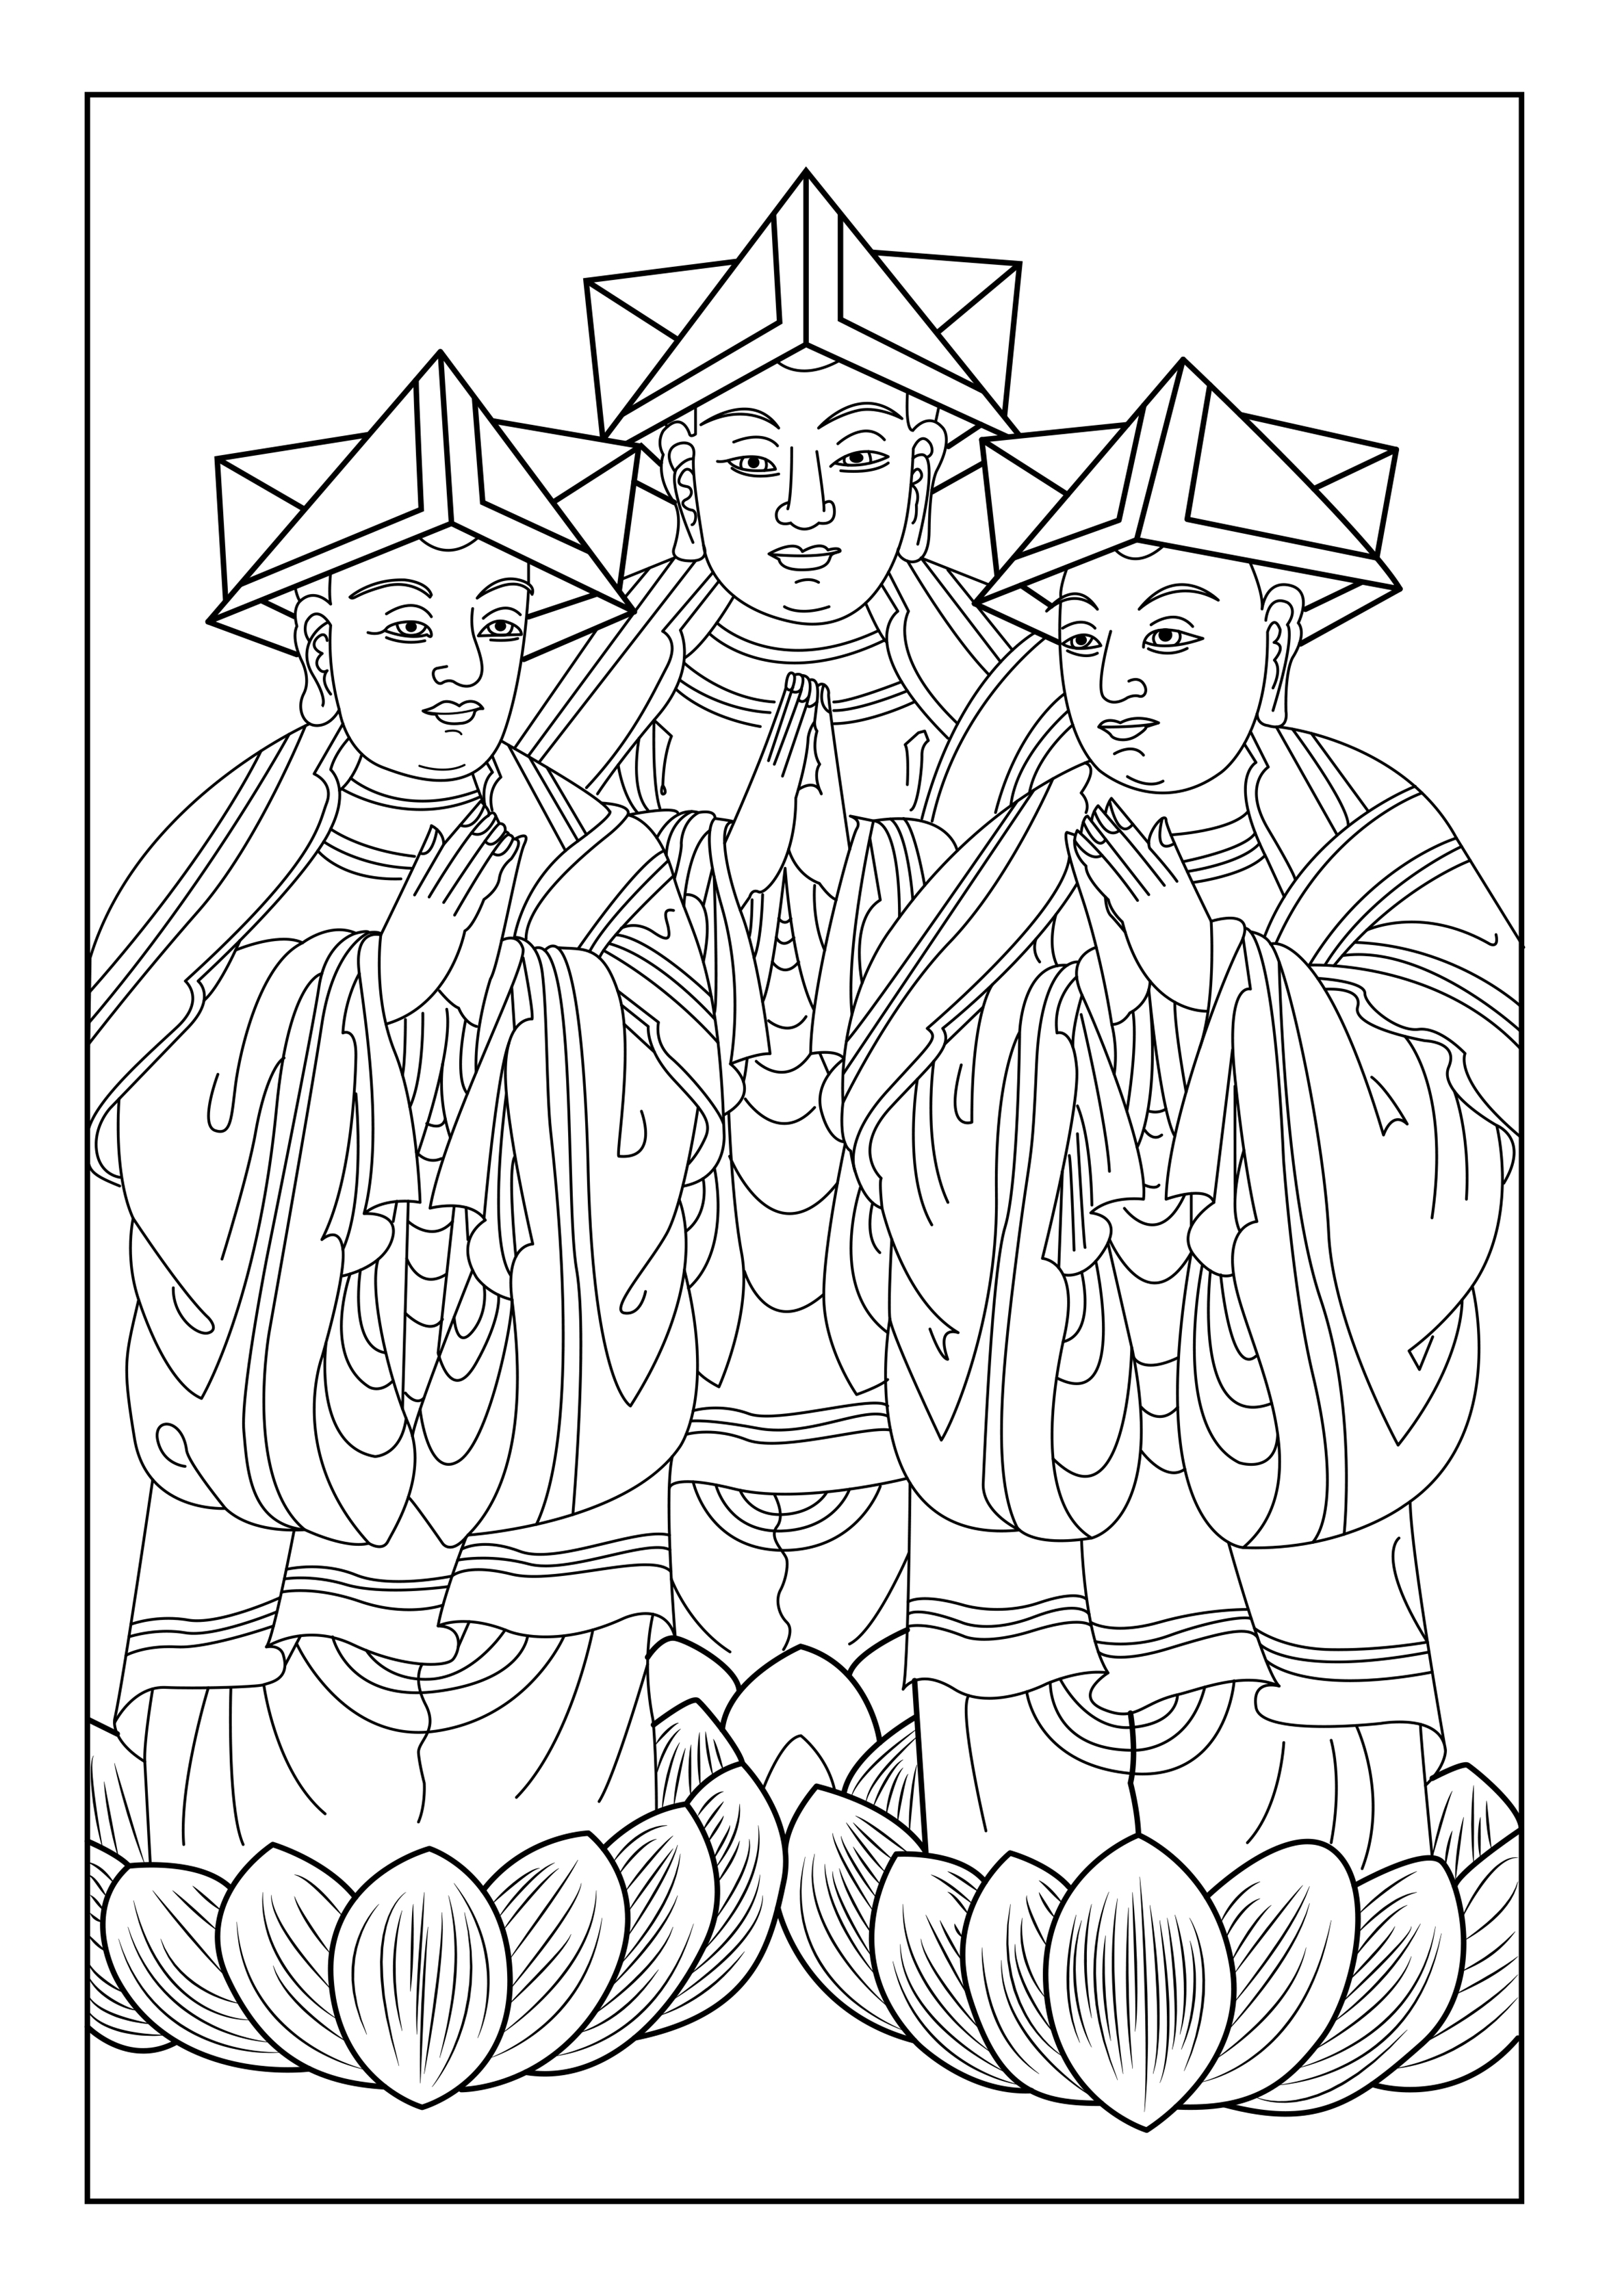 Here is a coloring page with three men of india, Artist : Celine